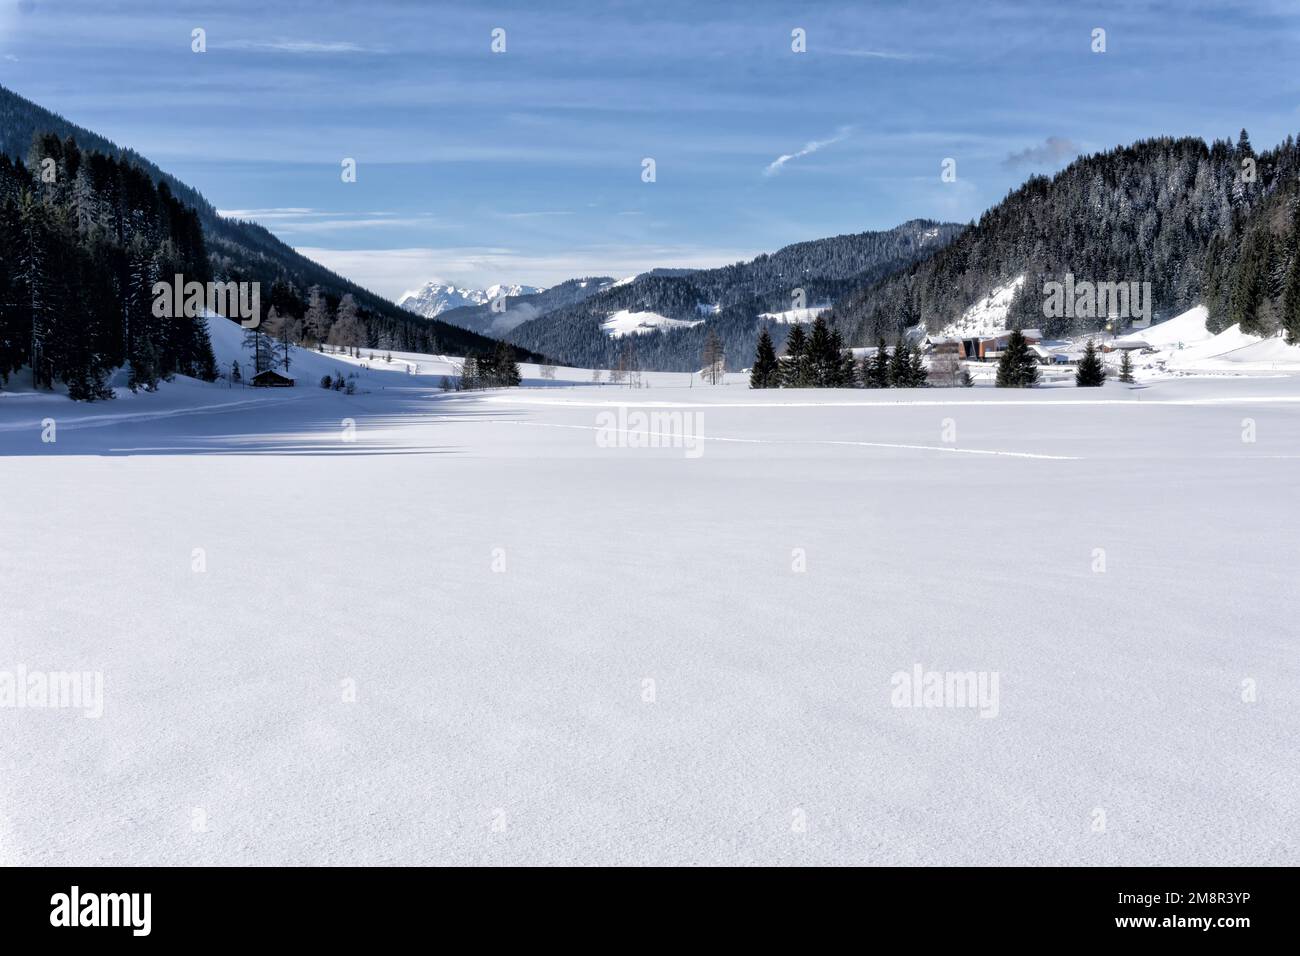 Winter mountain landscape, snow covers the valley, Salzburg Alps, Filzmoos Valley, Europe. Blue sky and white clouds. Stock Photo